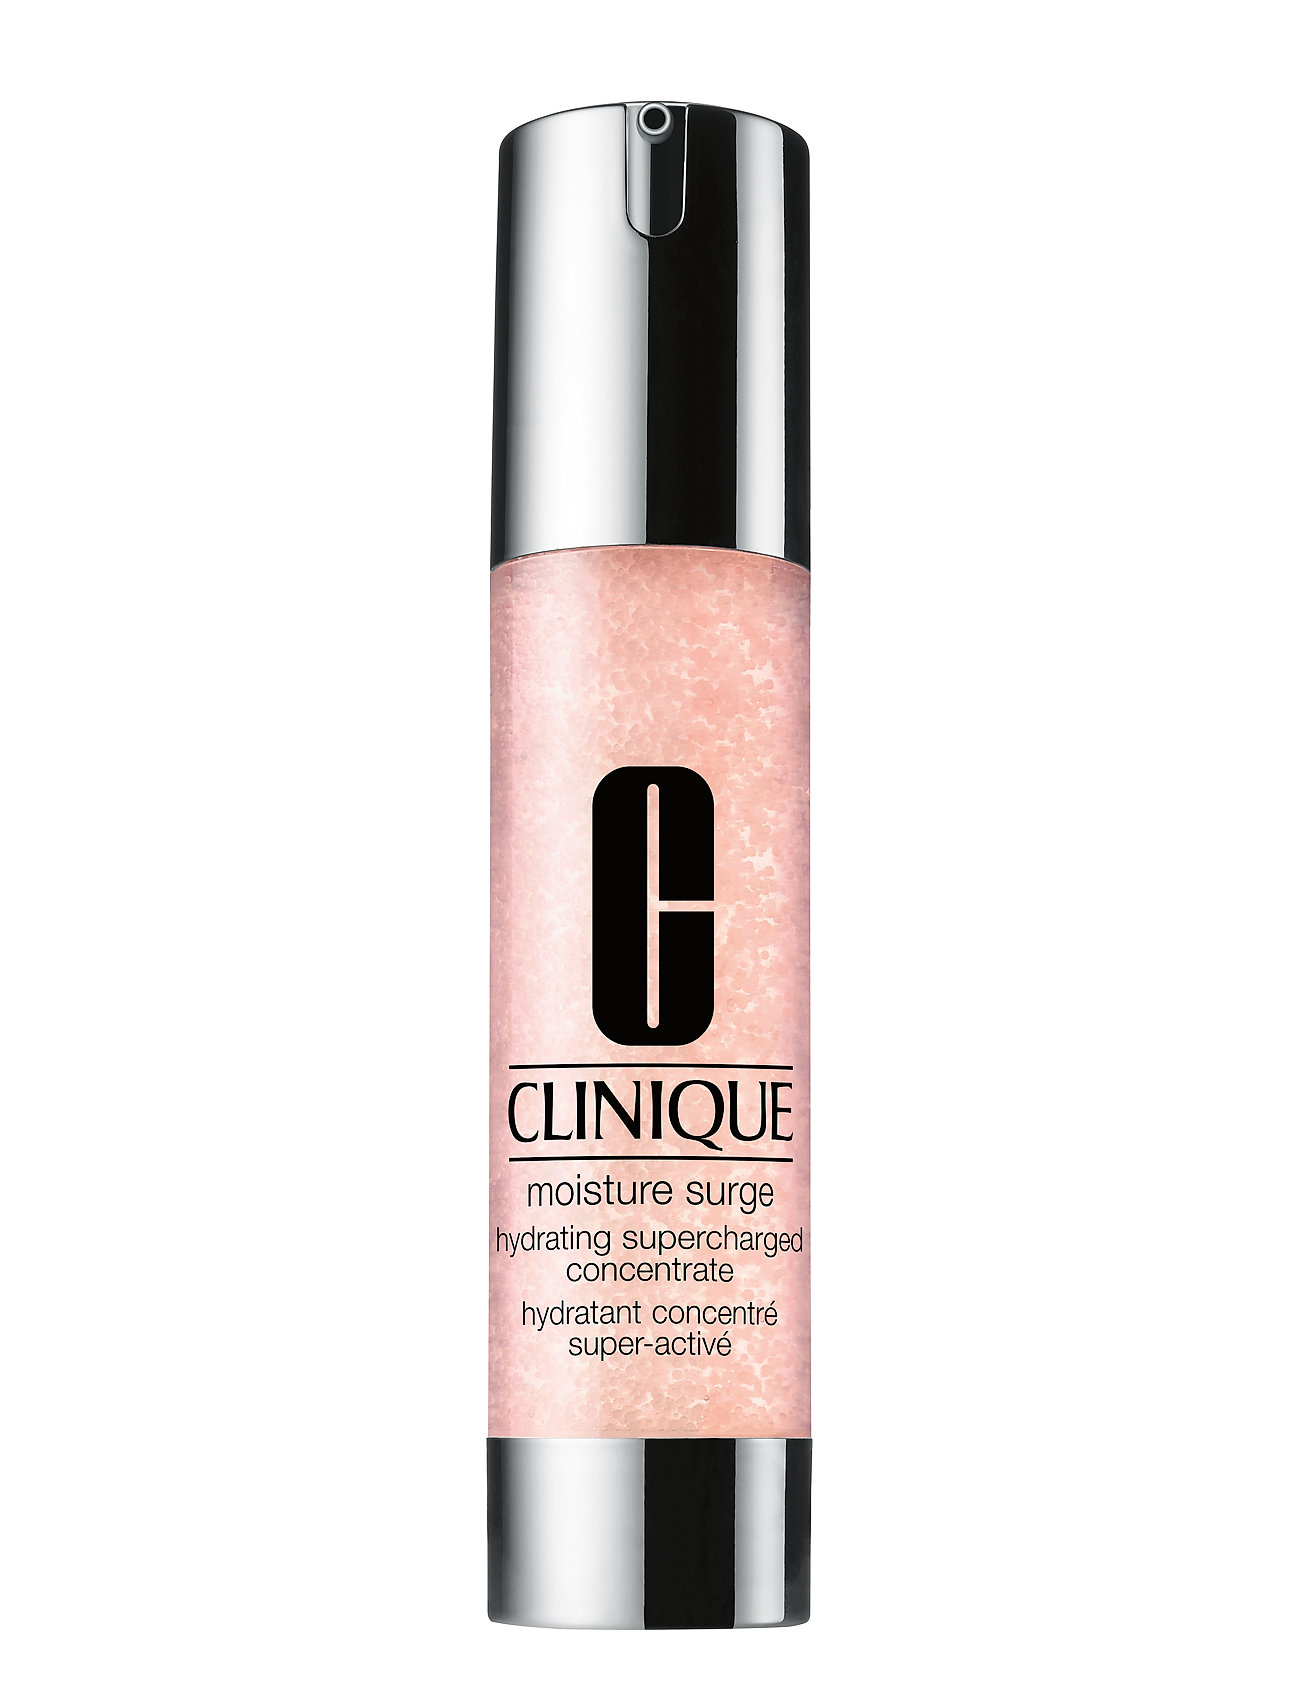 Clinique "Moisture Surge Hydrating Supercharged Concentrate Serum Ansigtspleje Nude Clinique"